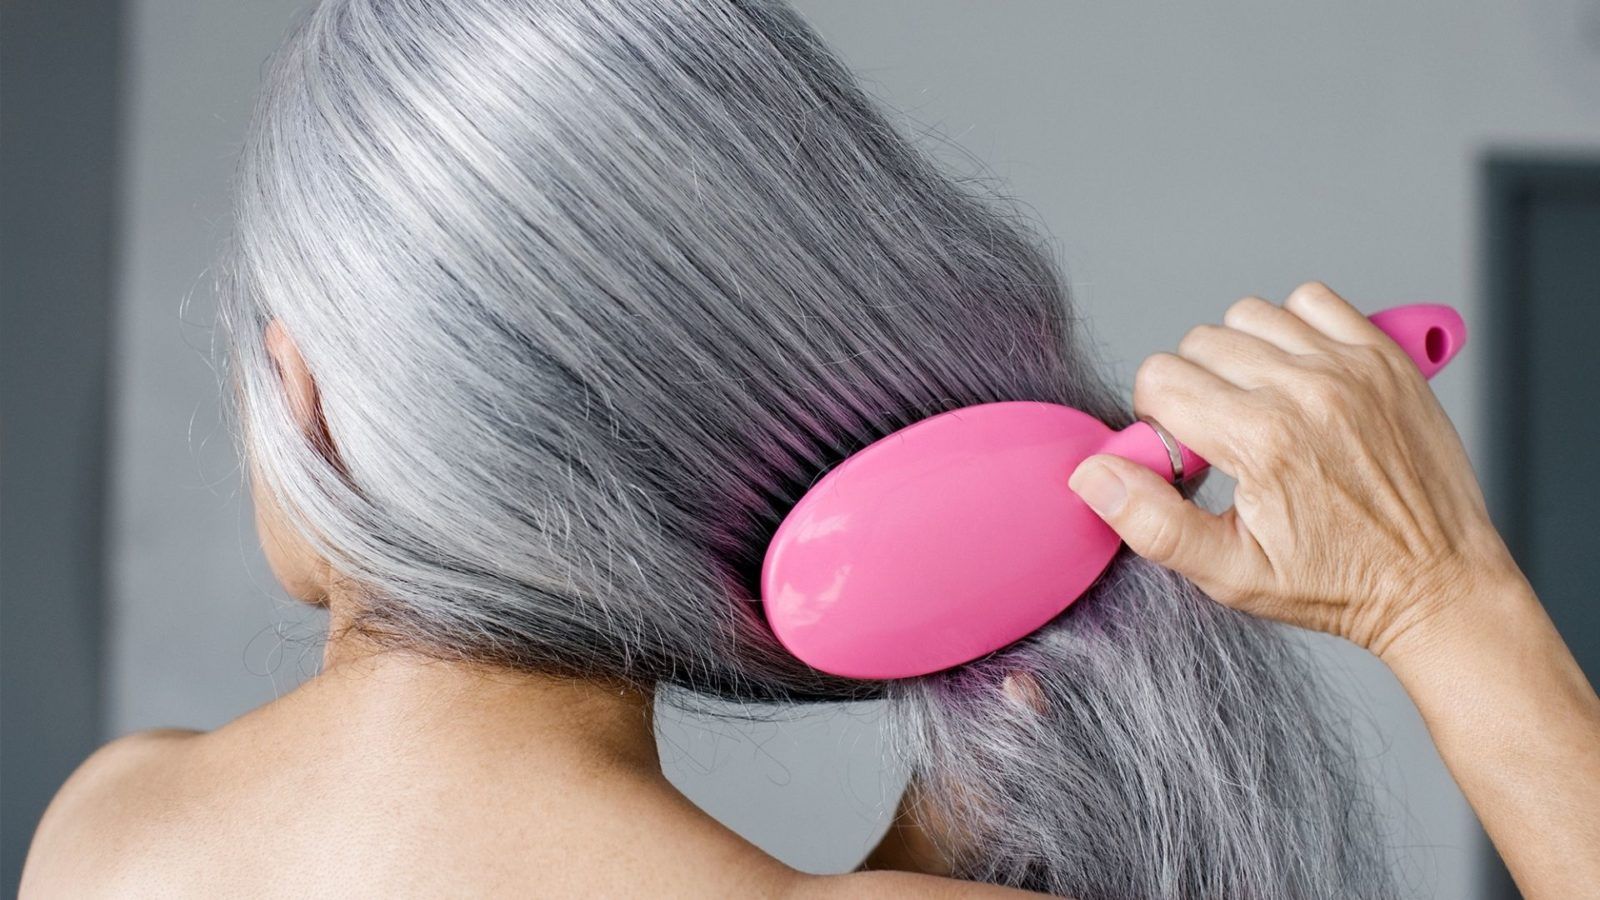 How to brush your hair the right way, according to stylists